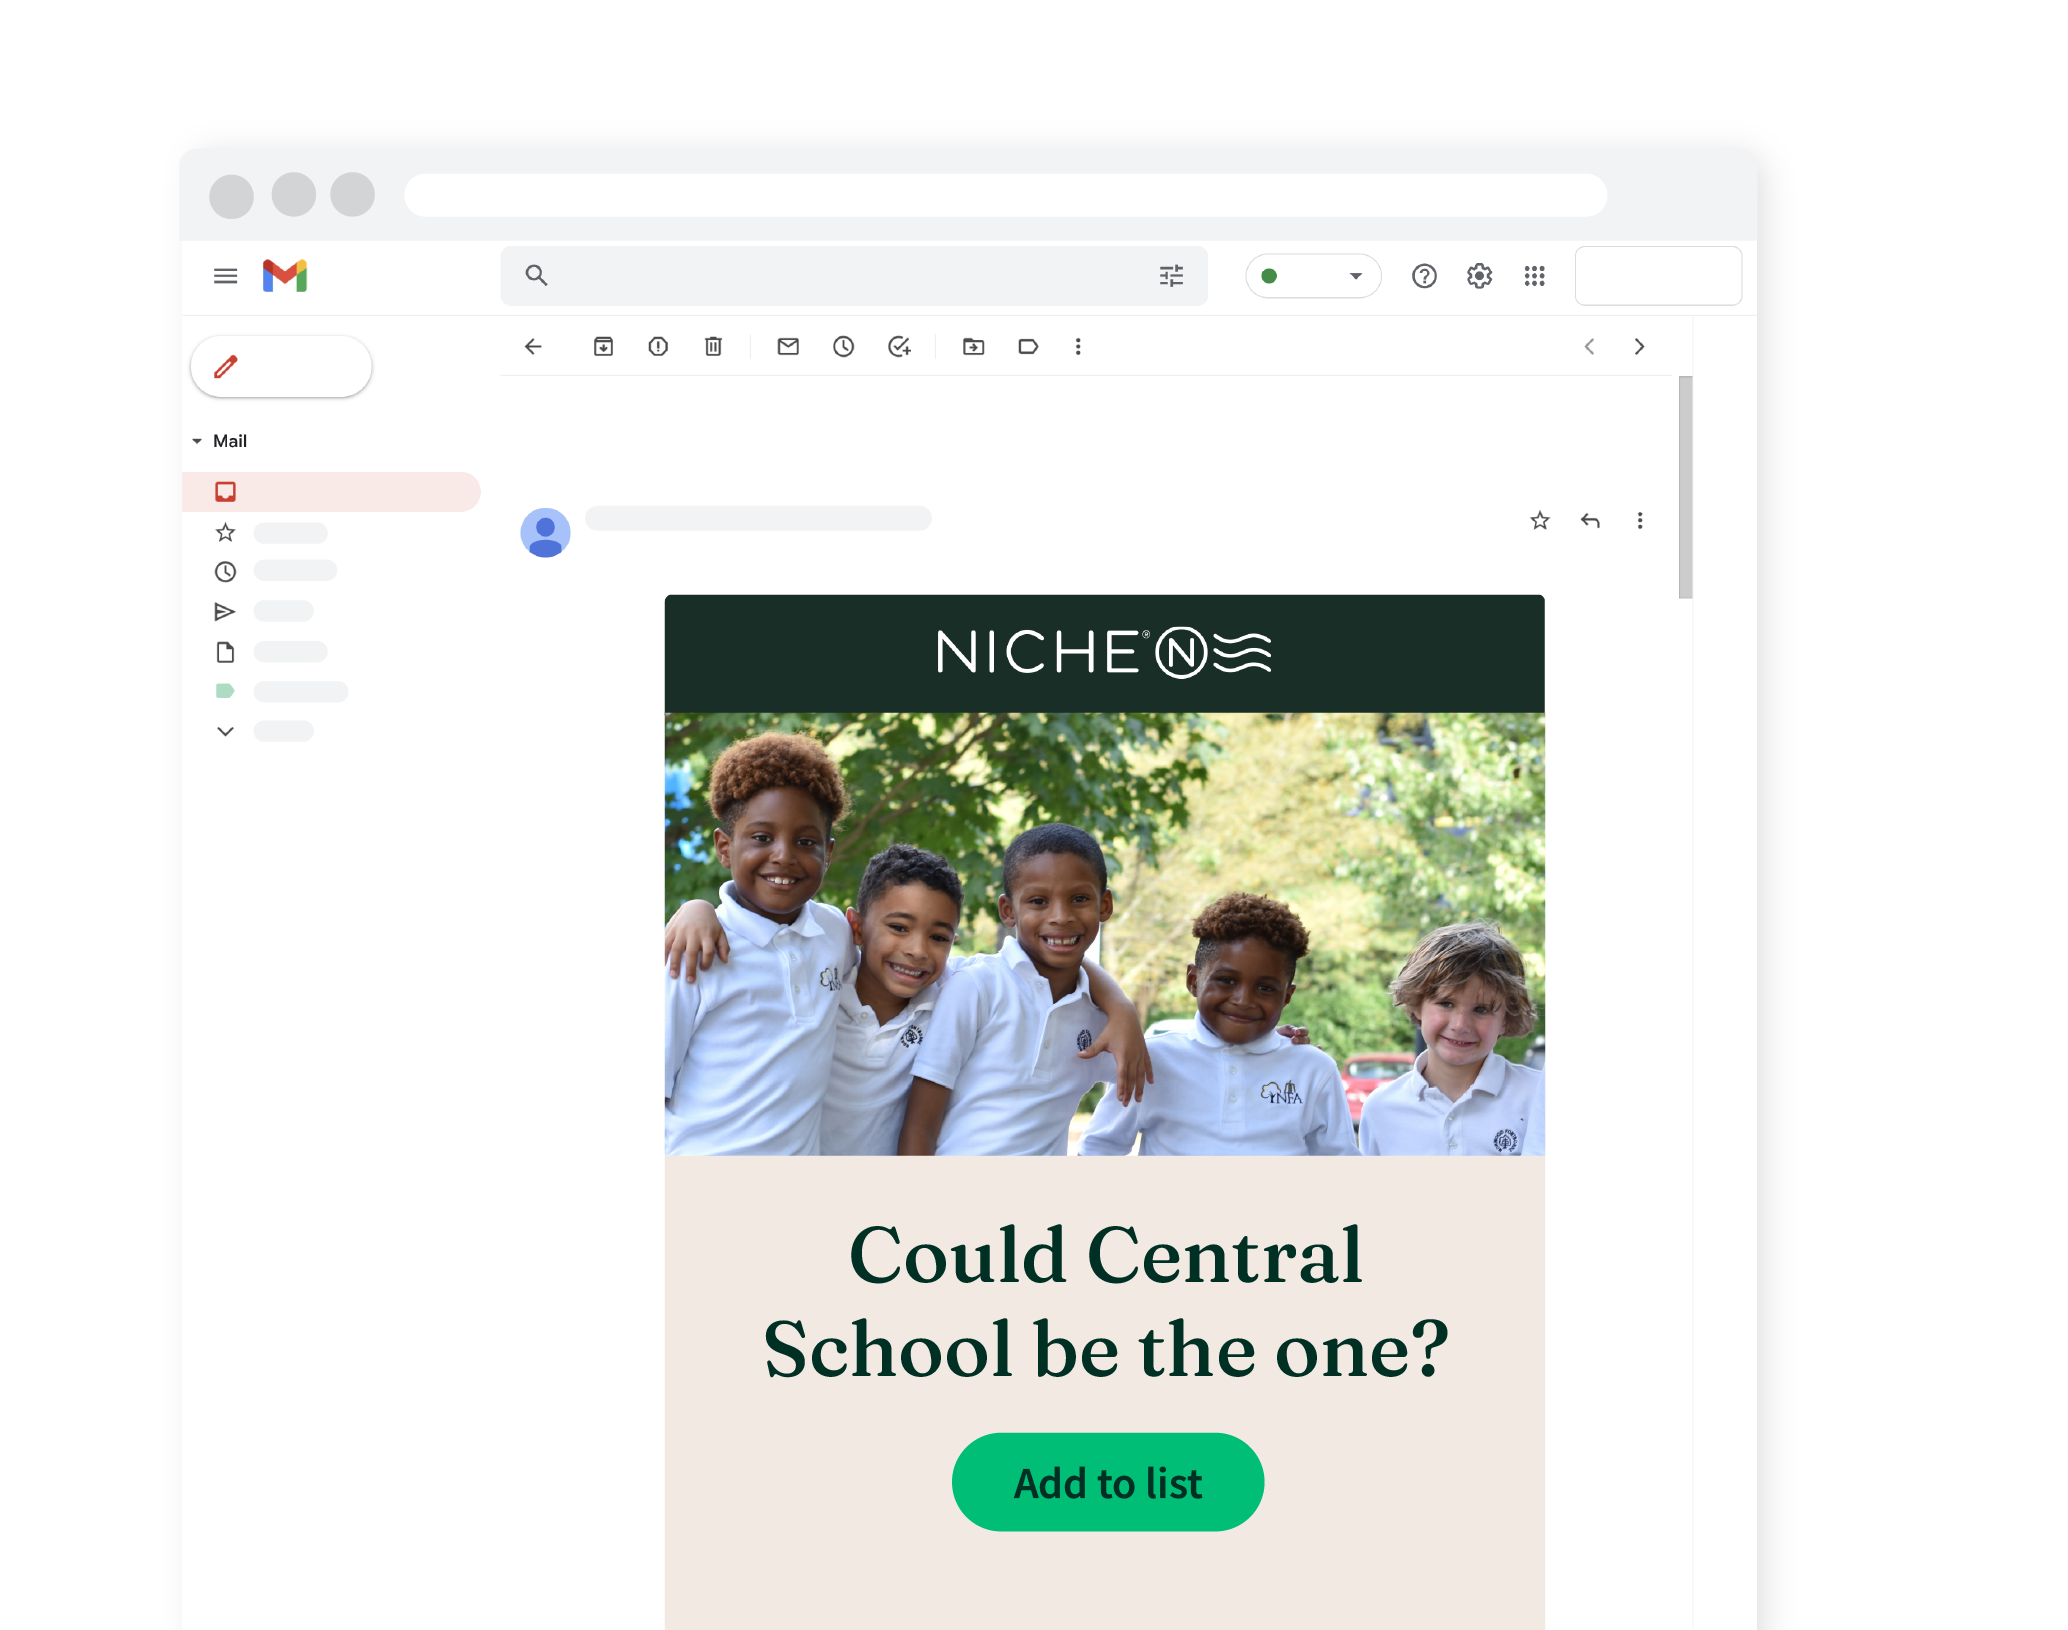 Image of school email sent by Niche